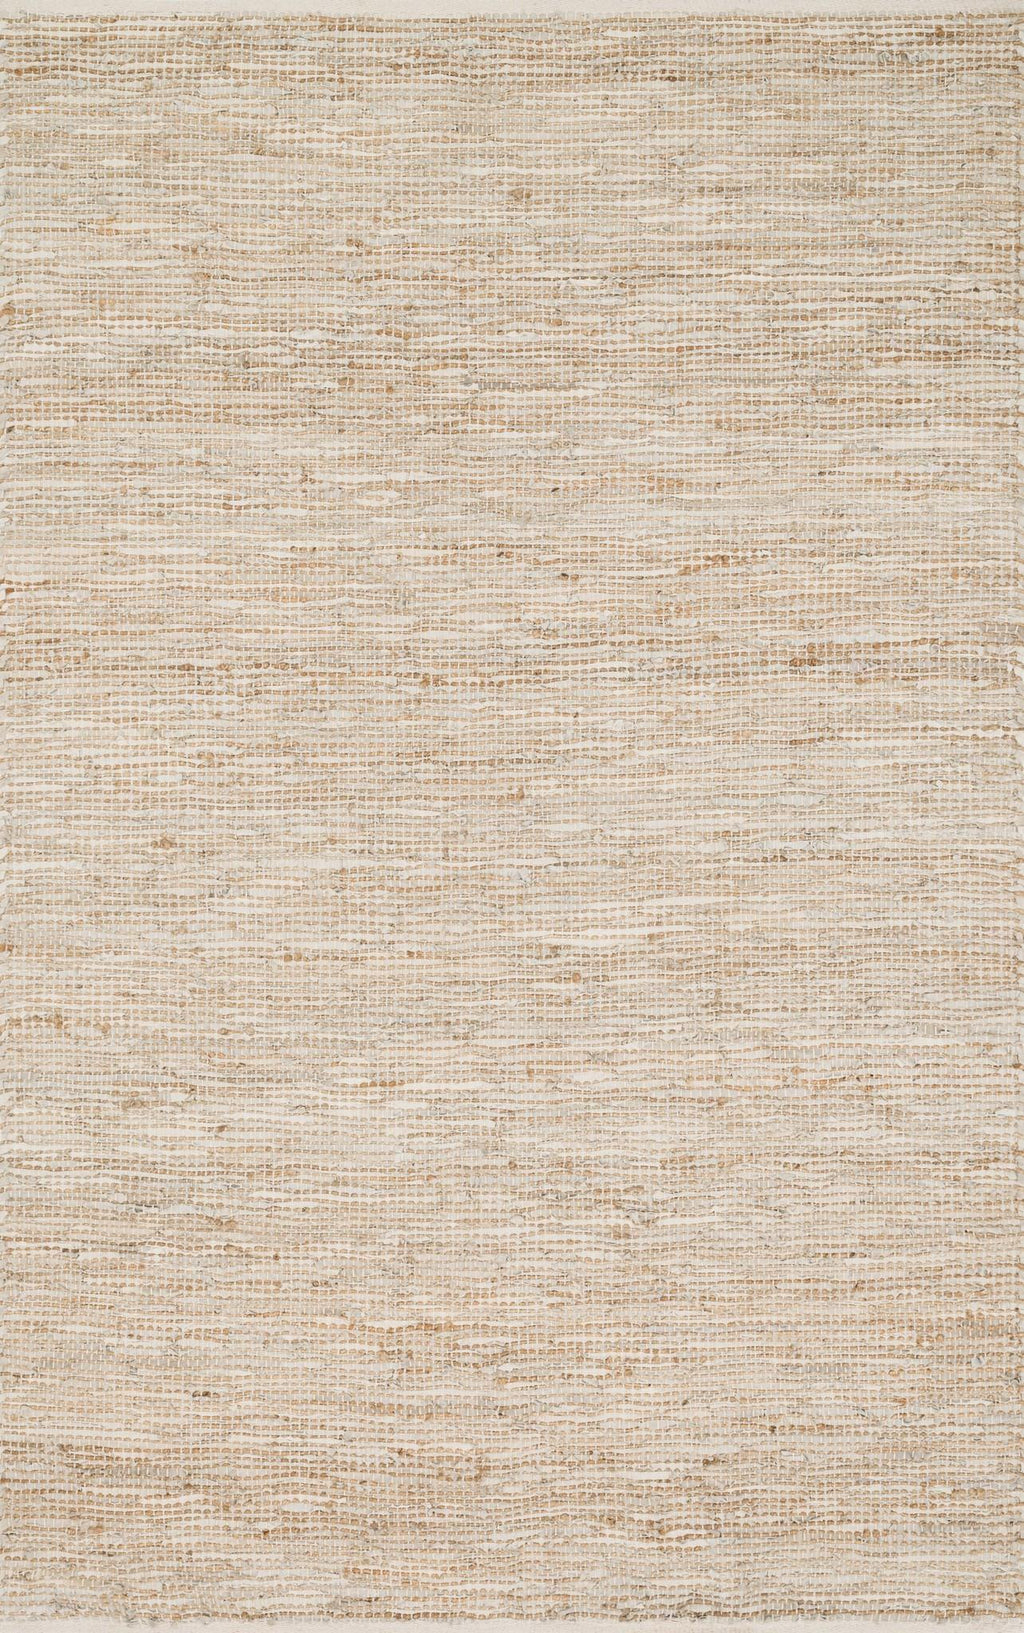 EDGE Collection Rug  in  IVORY Ivory Small Hand-Woven Jute/Hemp